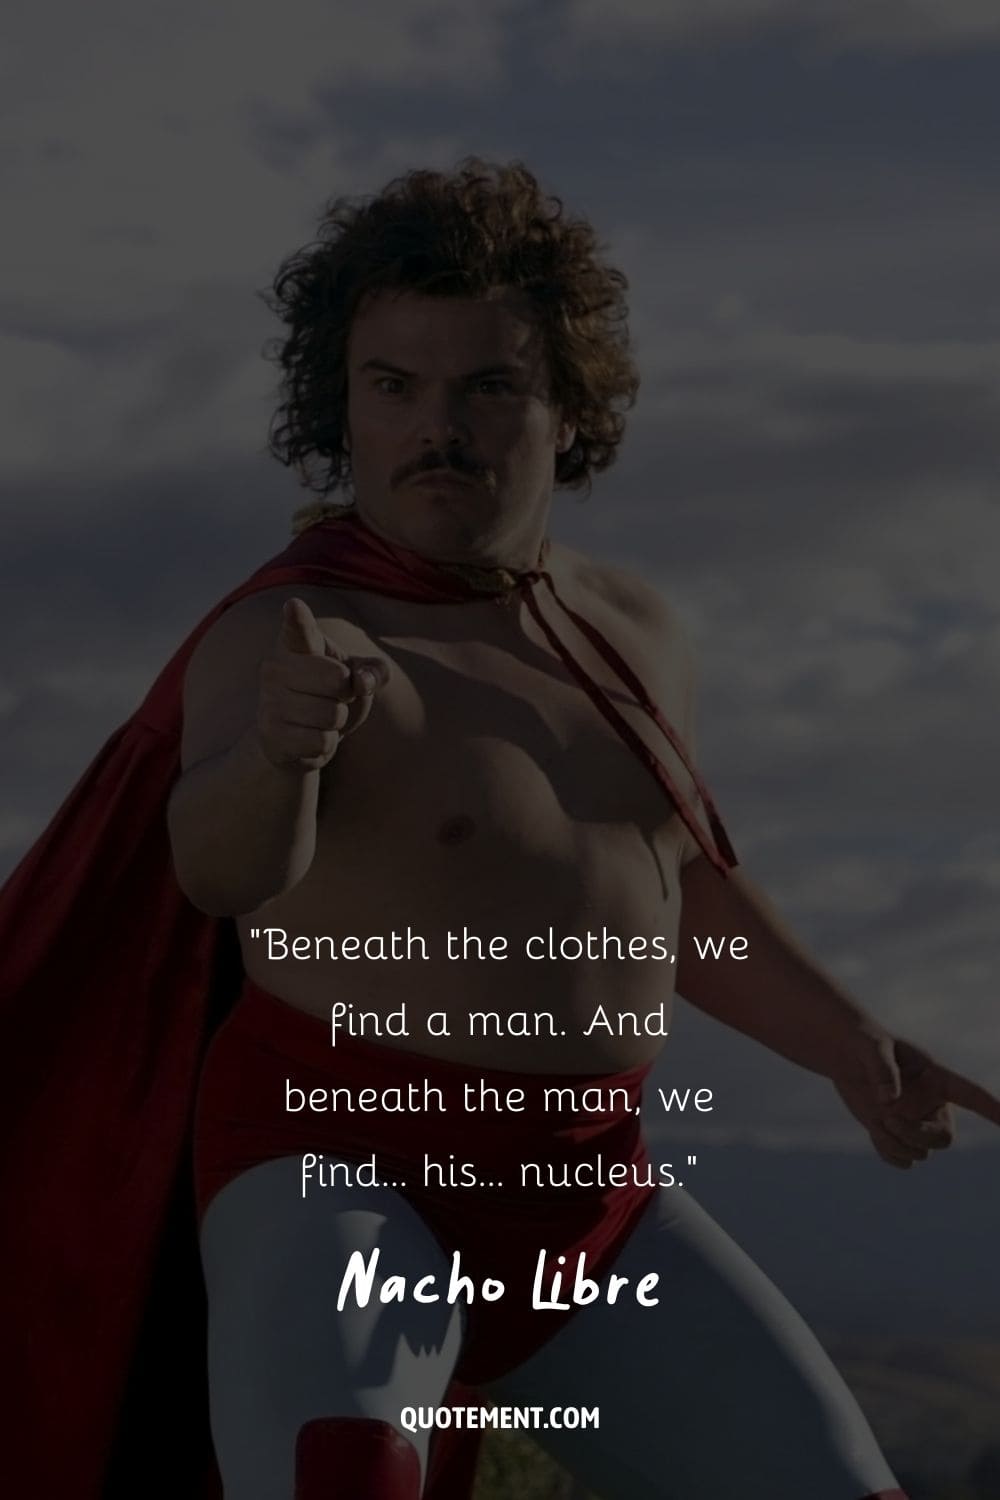 Beneath the clothes, we find a man. And beneath the man, we find... his... nucleus.